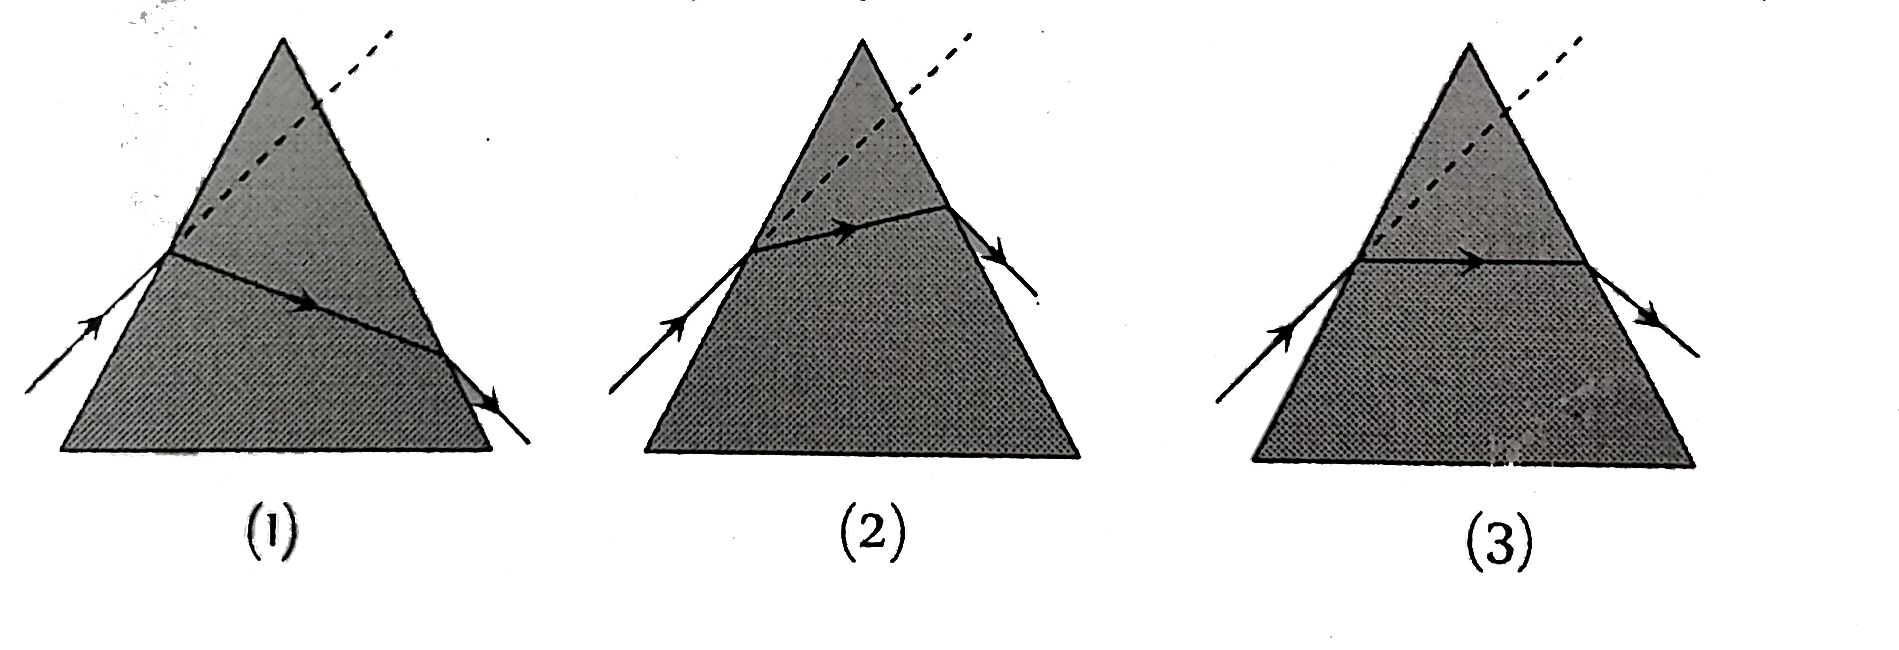 The figures represent three cases of a ray passing through a prism of angle A. The case corresponding to minimum deviation is